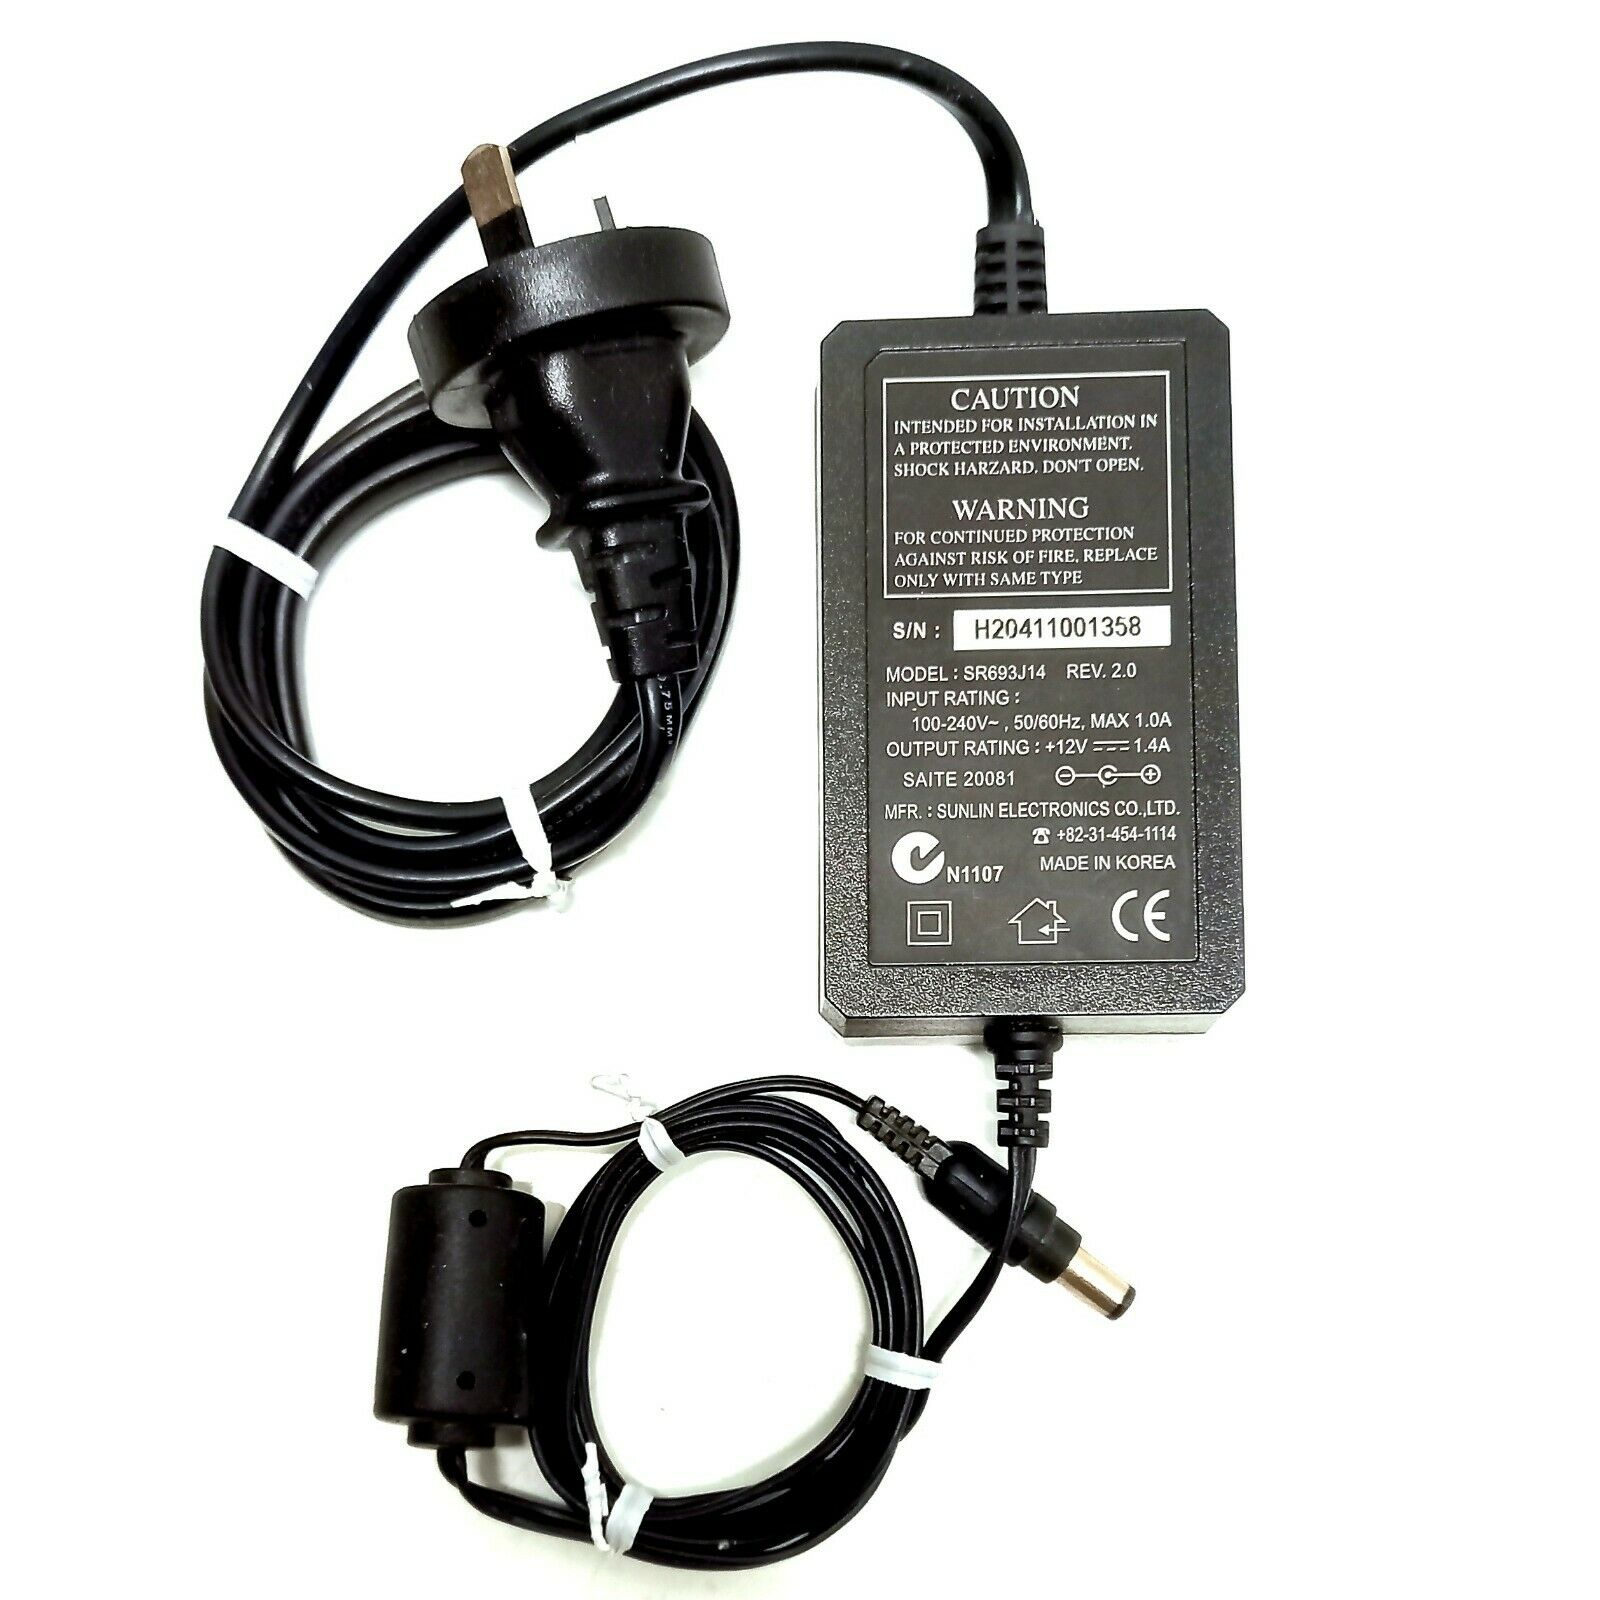 Sunlin Electronics AC/DC Power Supply Adapter SR693J14 12v Brand: Sunlin Electronics Type: AC/DC Adapter Connection